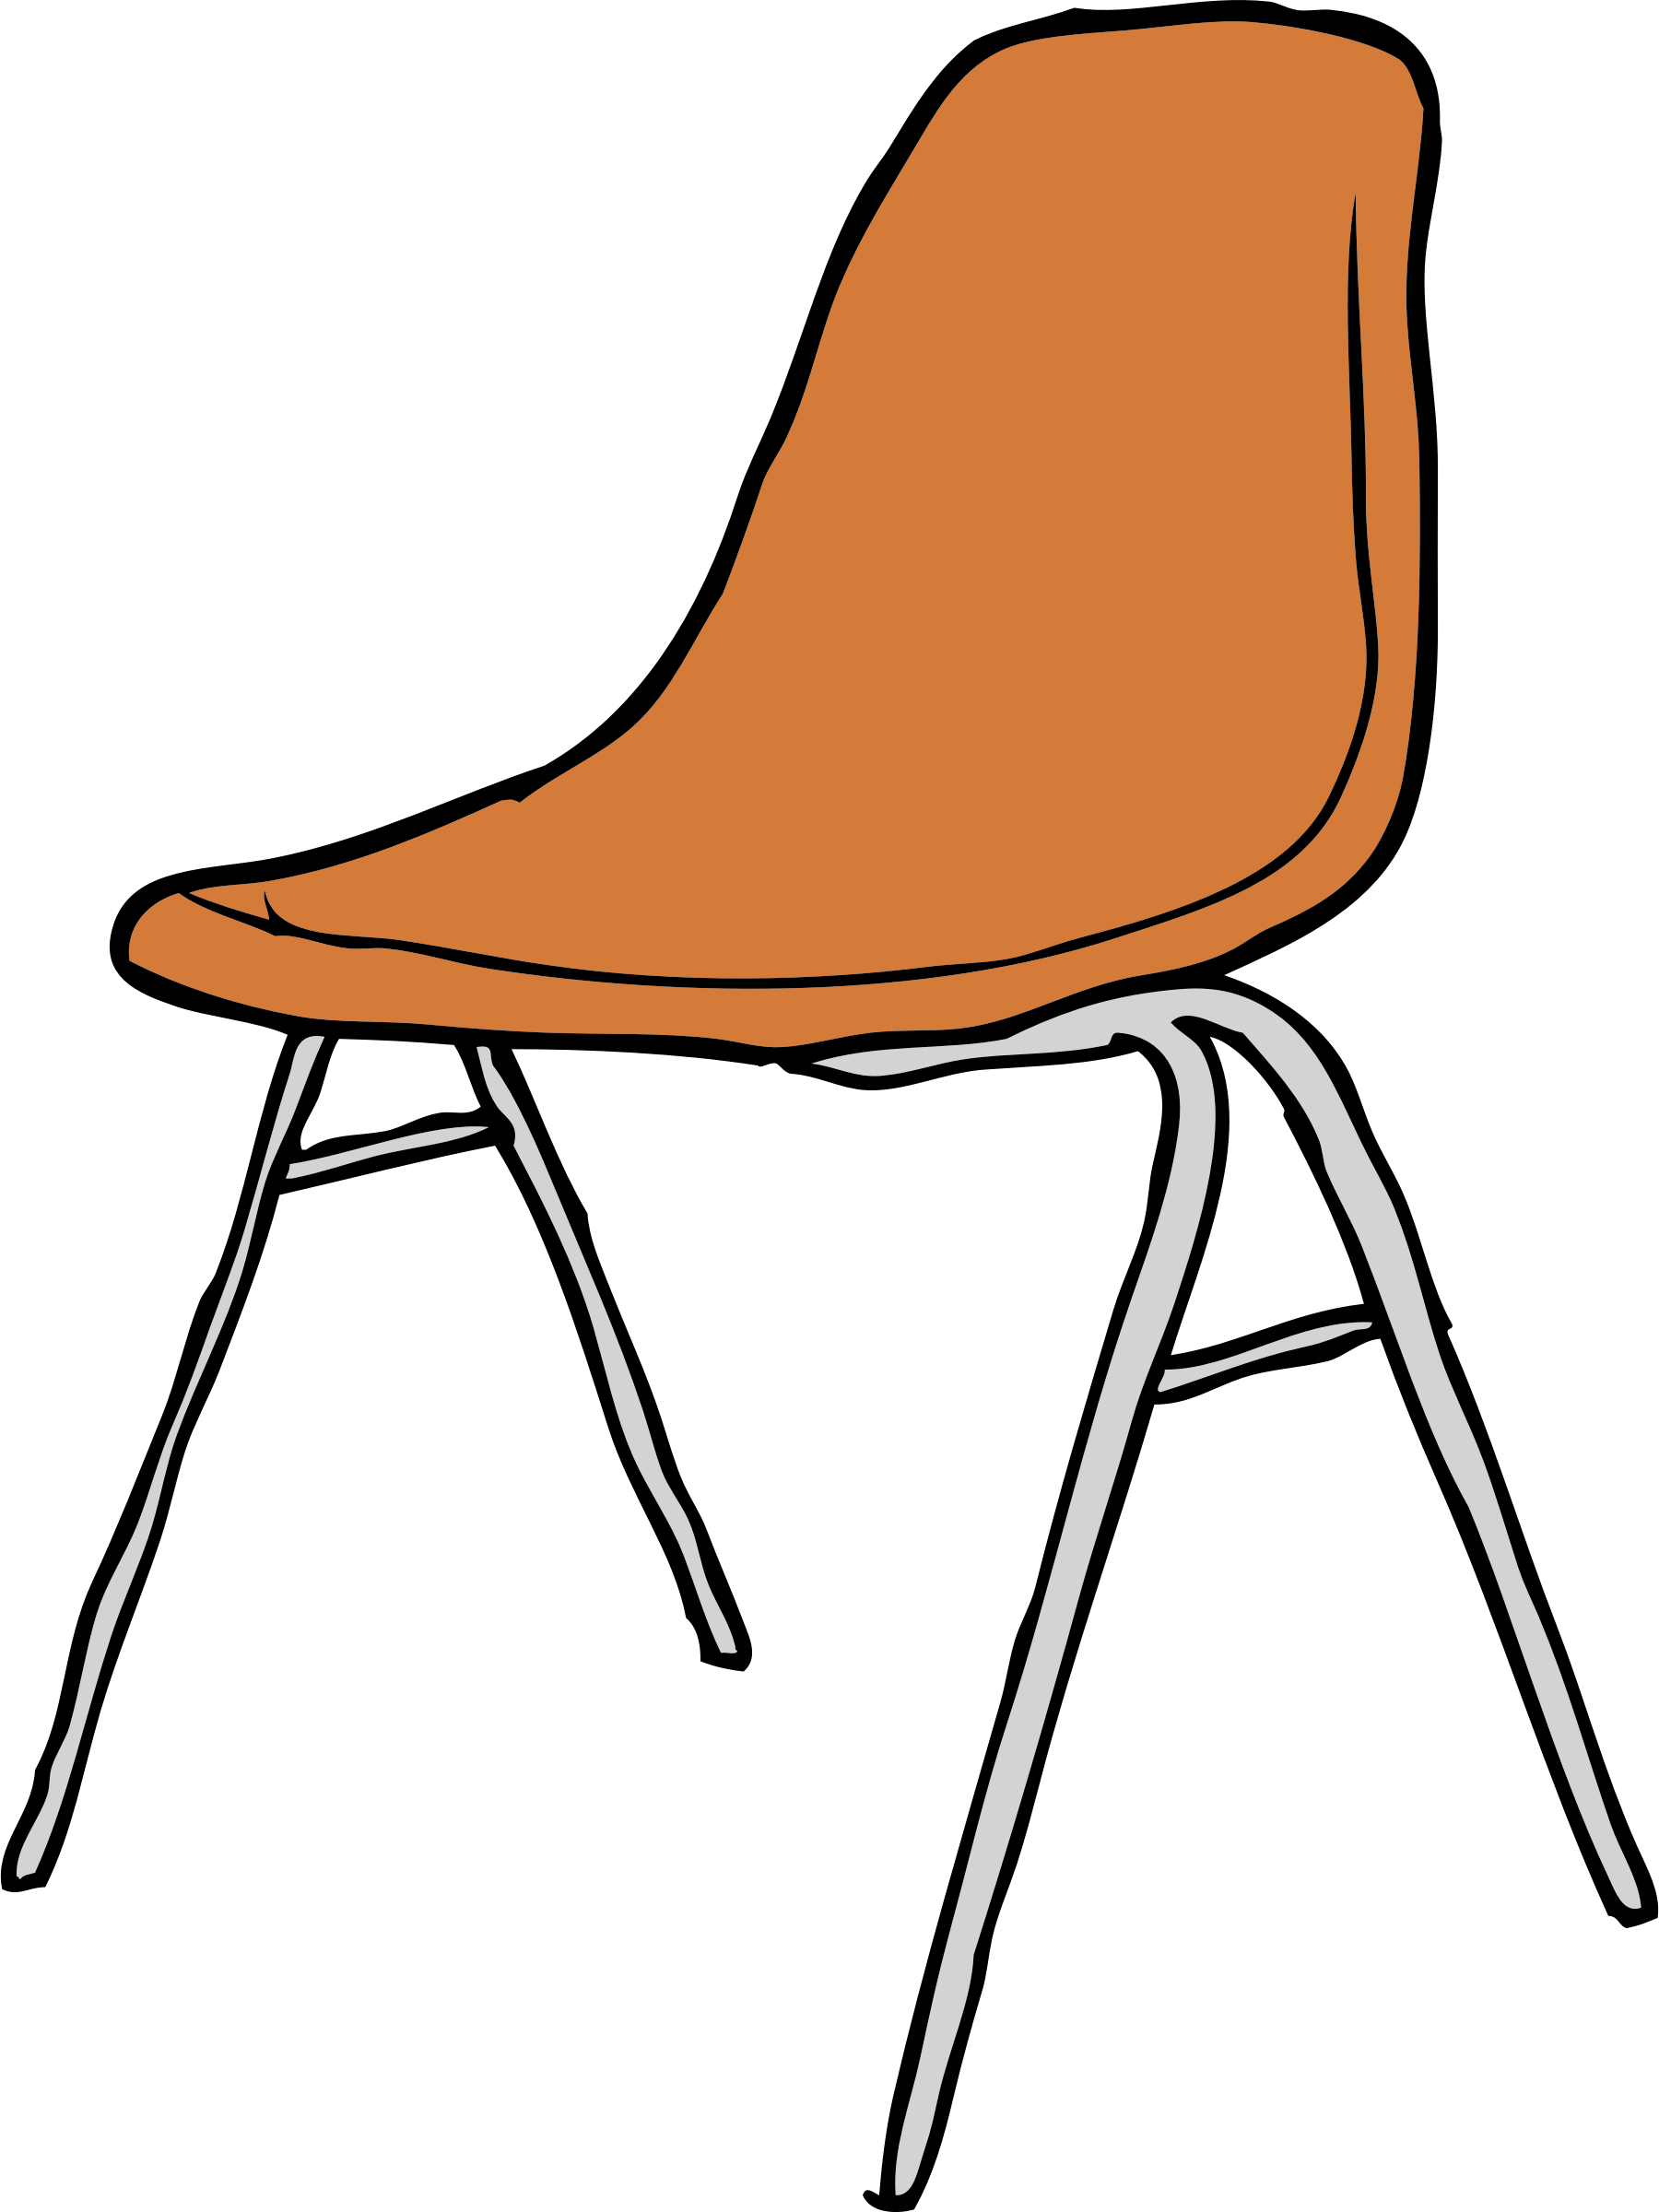 Big Image - Chair Clipart (1800x2400)